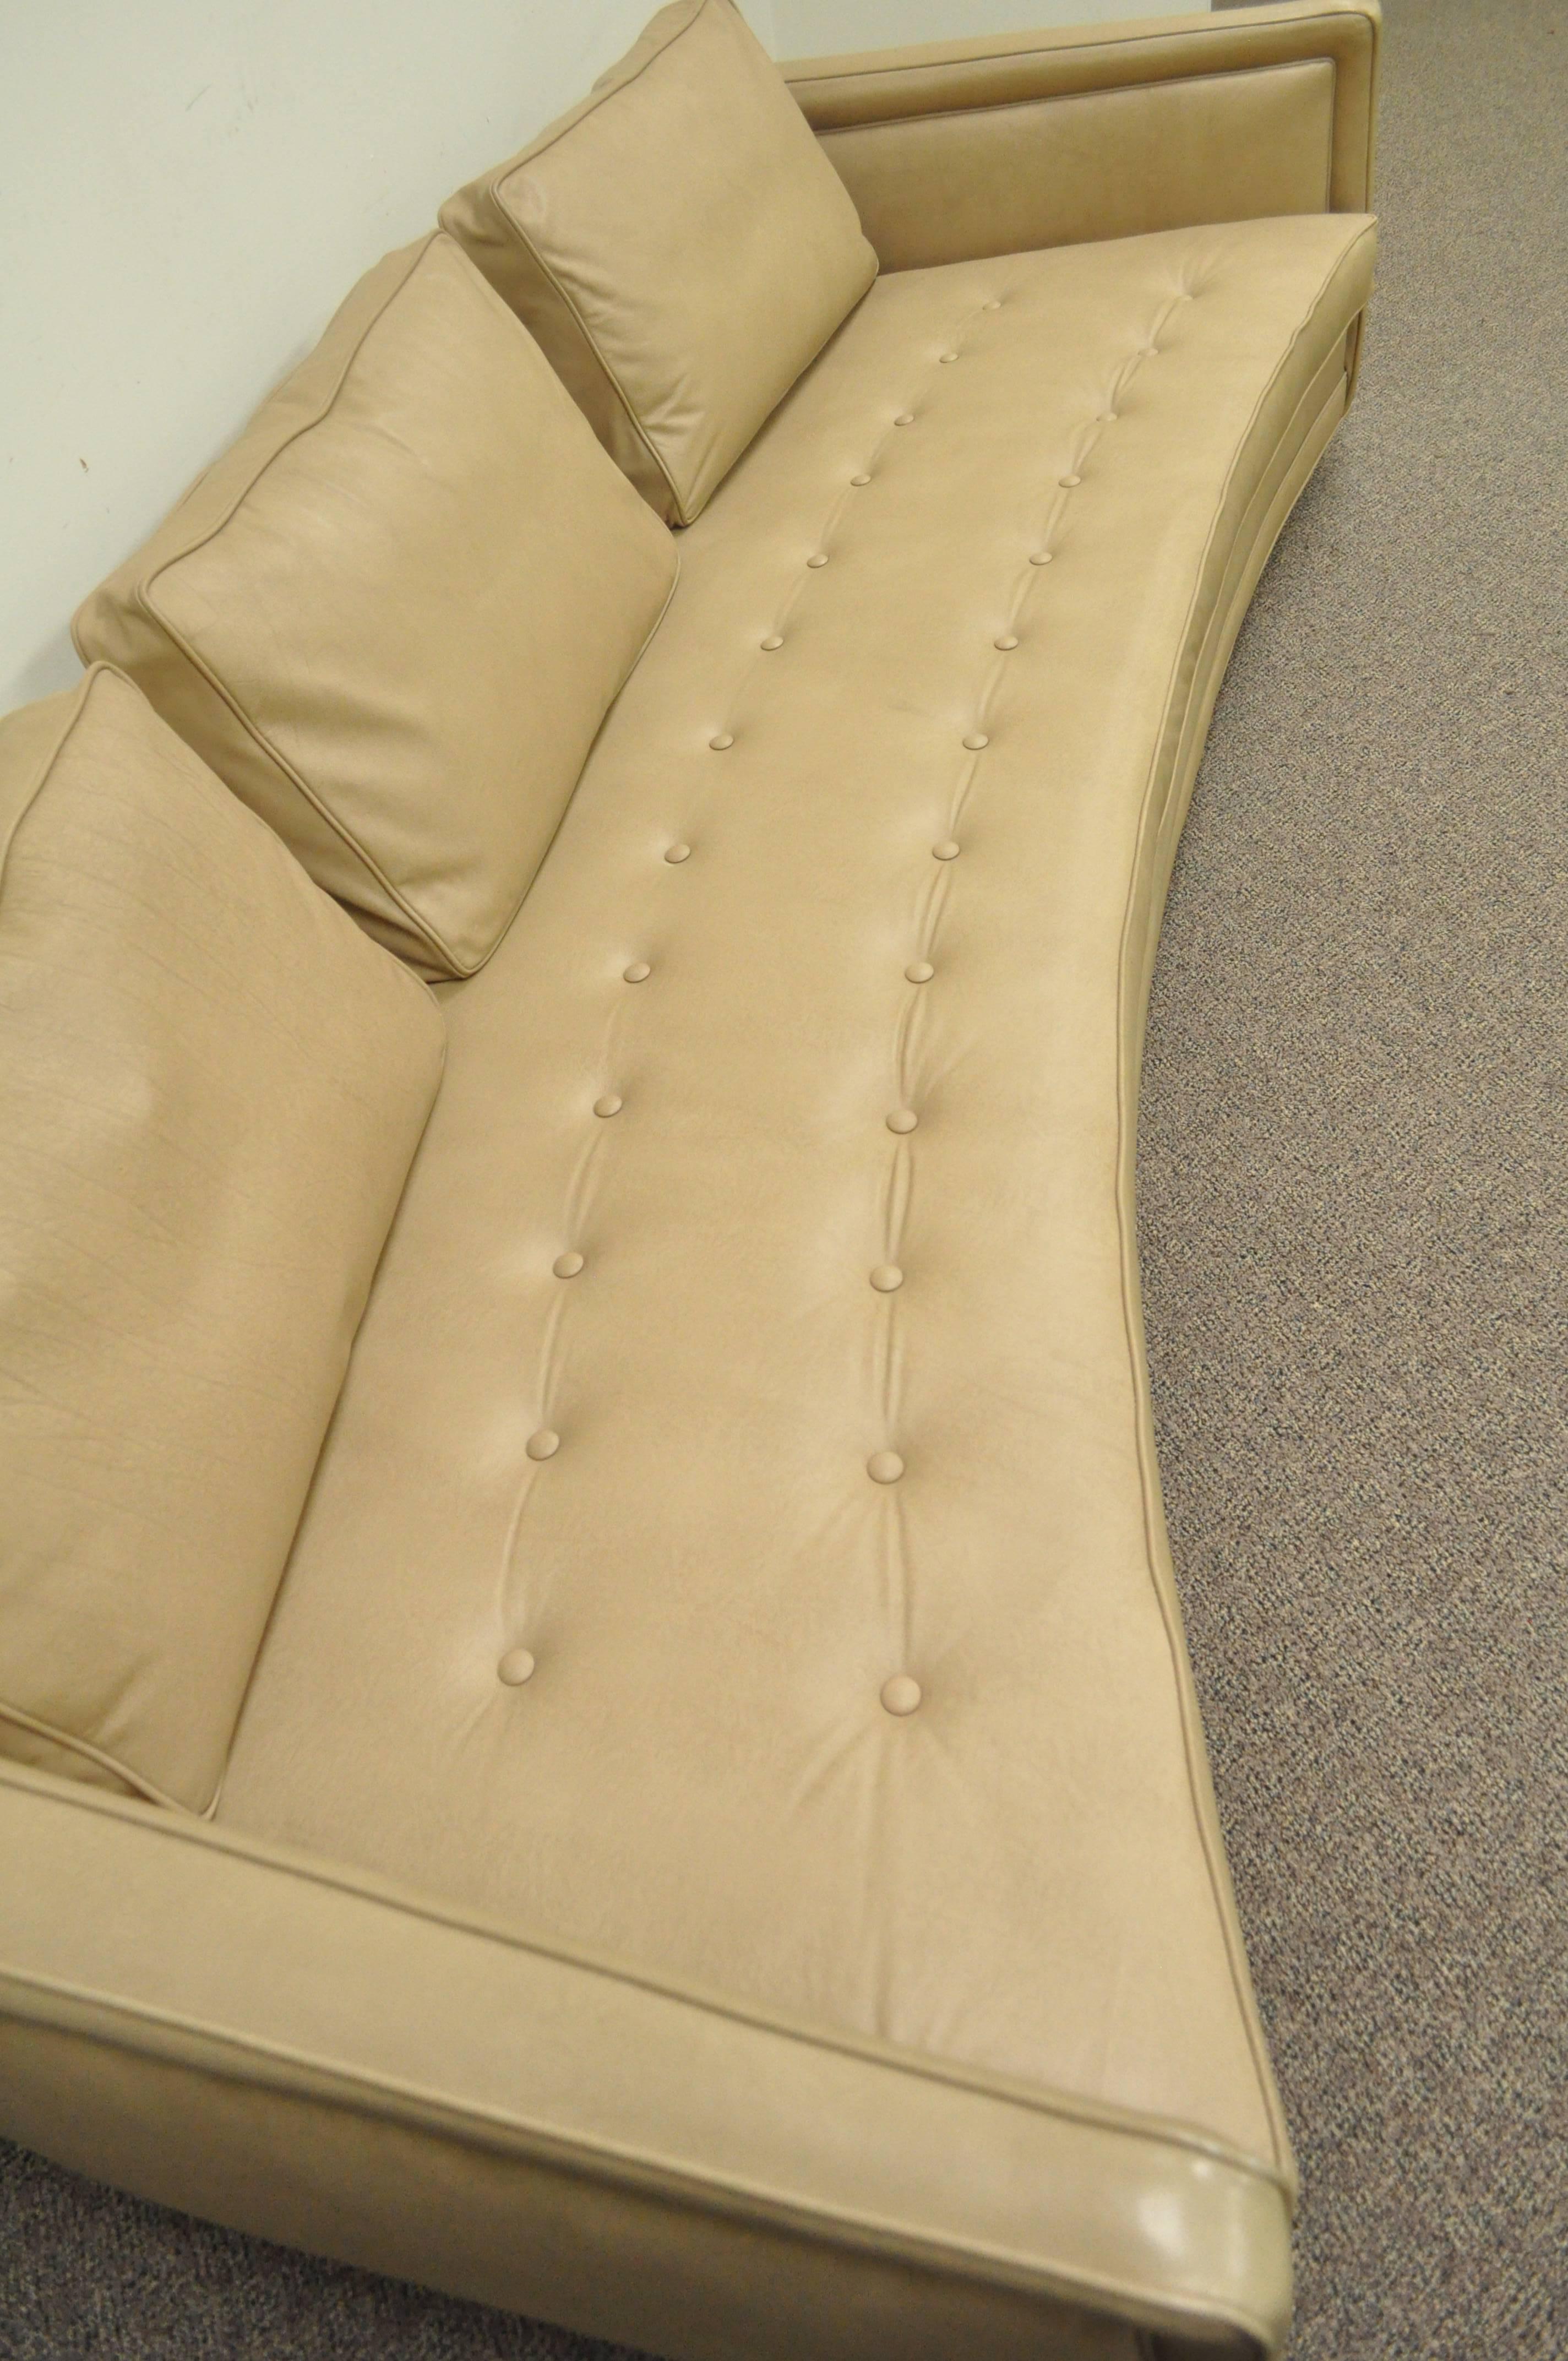 Long Curved Harvey Probber Button Tufted Leather Mid-Century Modern Sofa In Good Condition For Sale In Philadelphia, PA